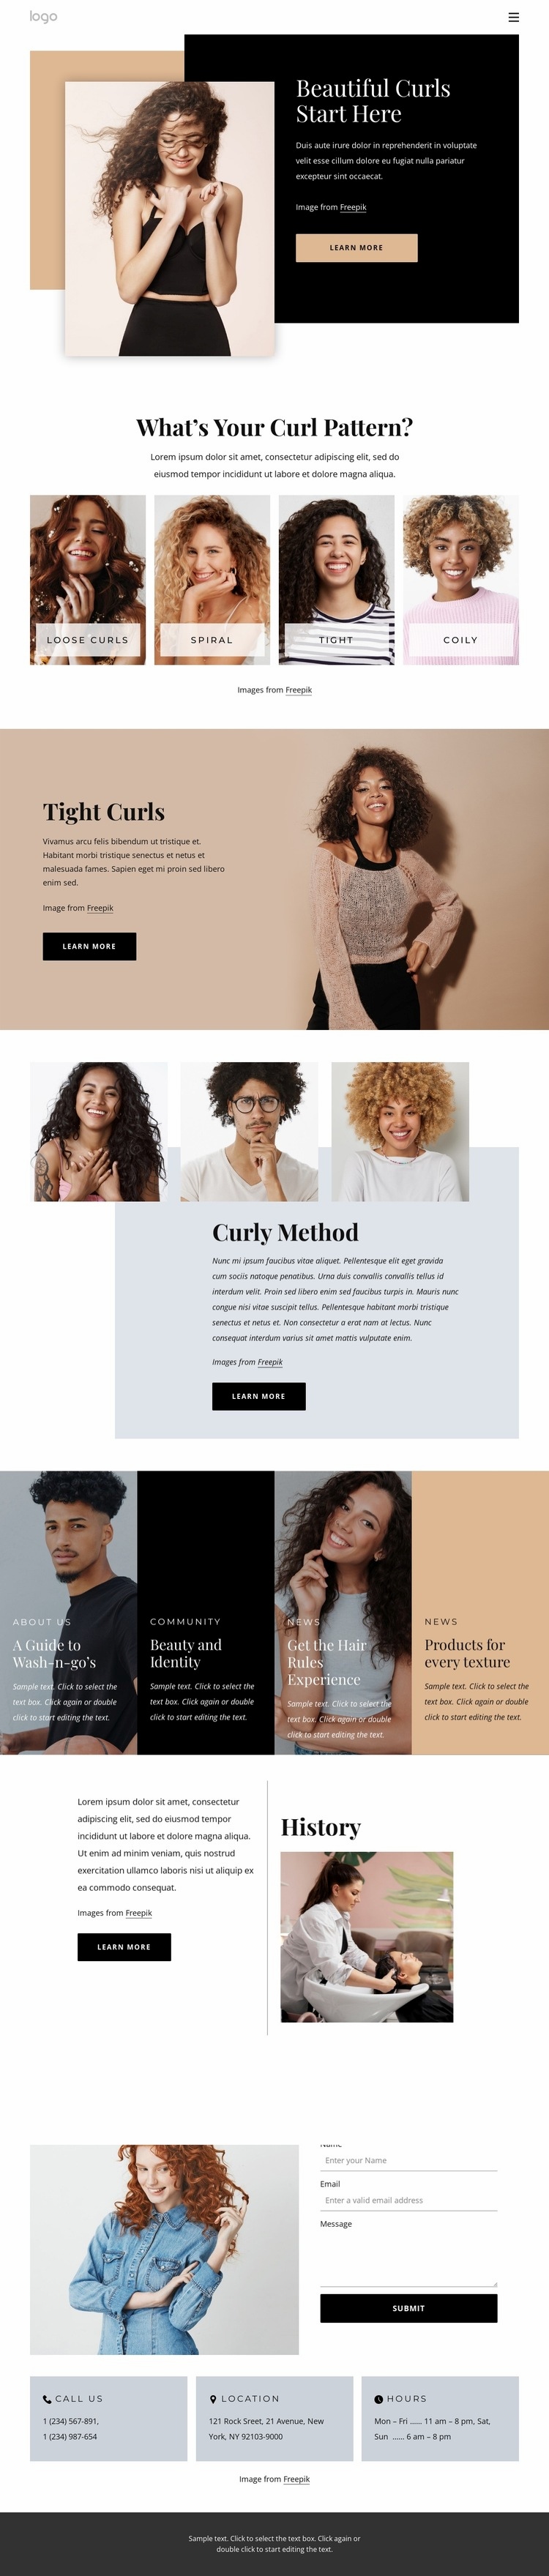 Bring out the best in your curls Wysiwyg Editor Html 